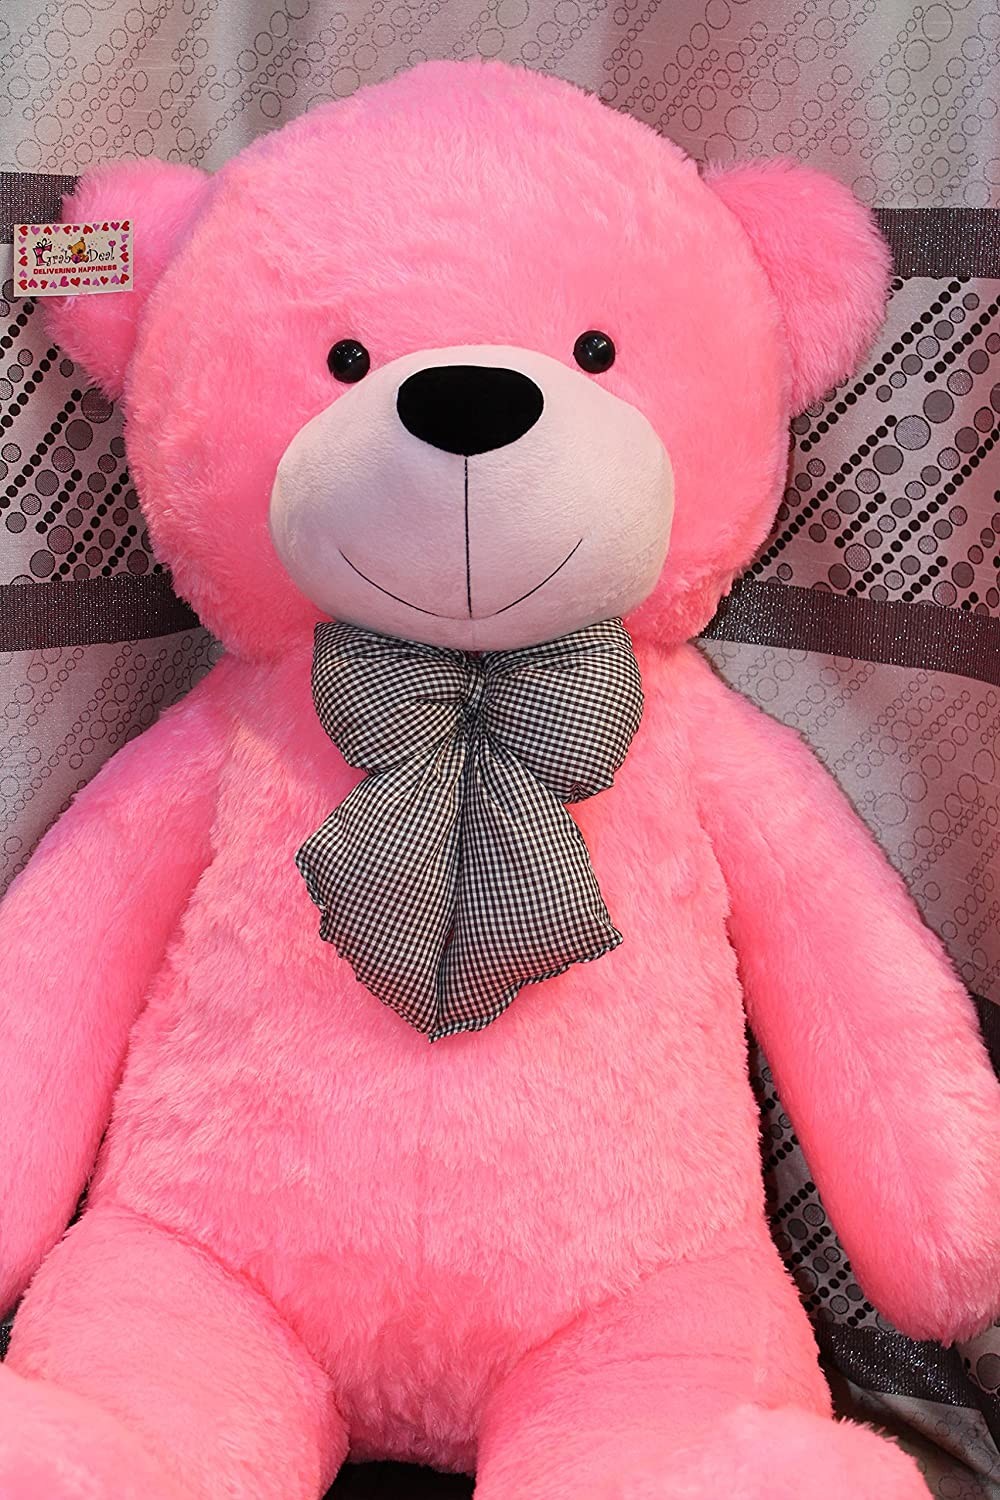 pink teddy bear • ShareChat Photos and Videos